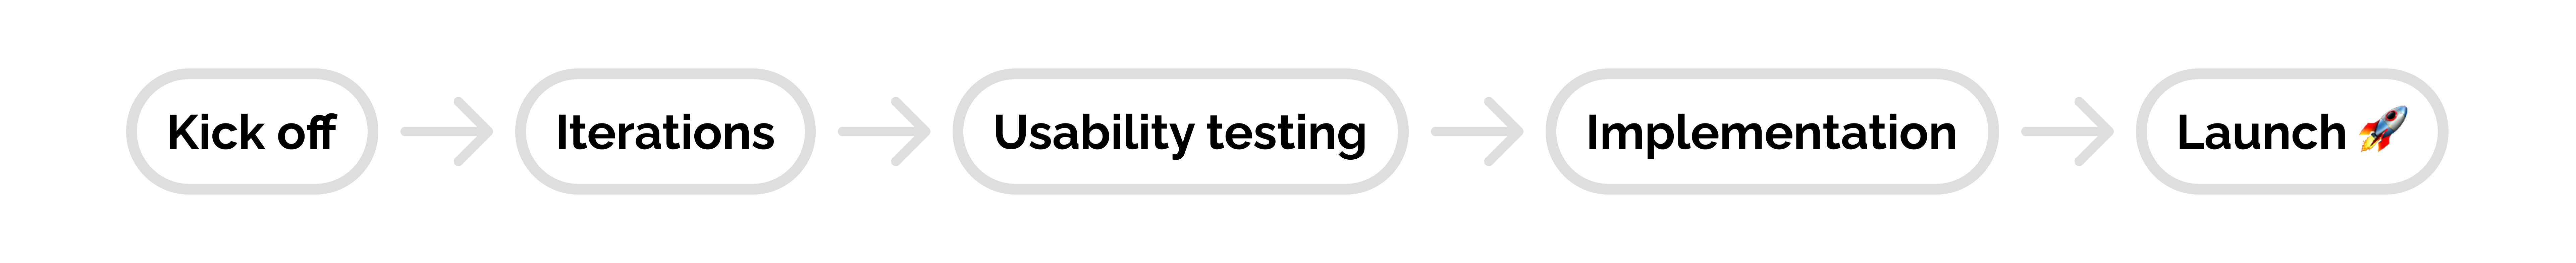 process: kick-off iterations usability testing implementation launch